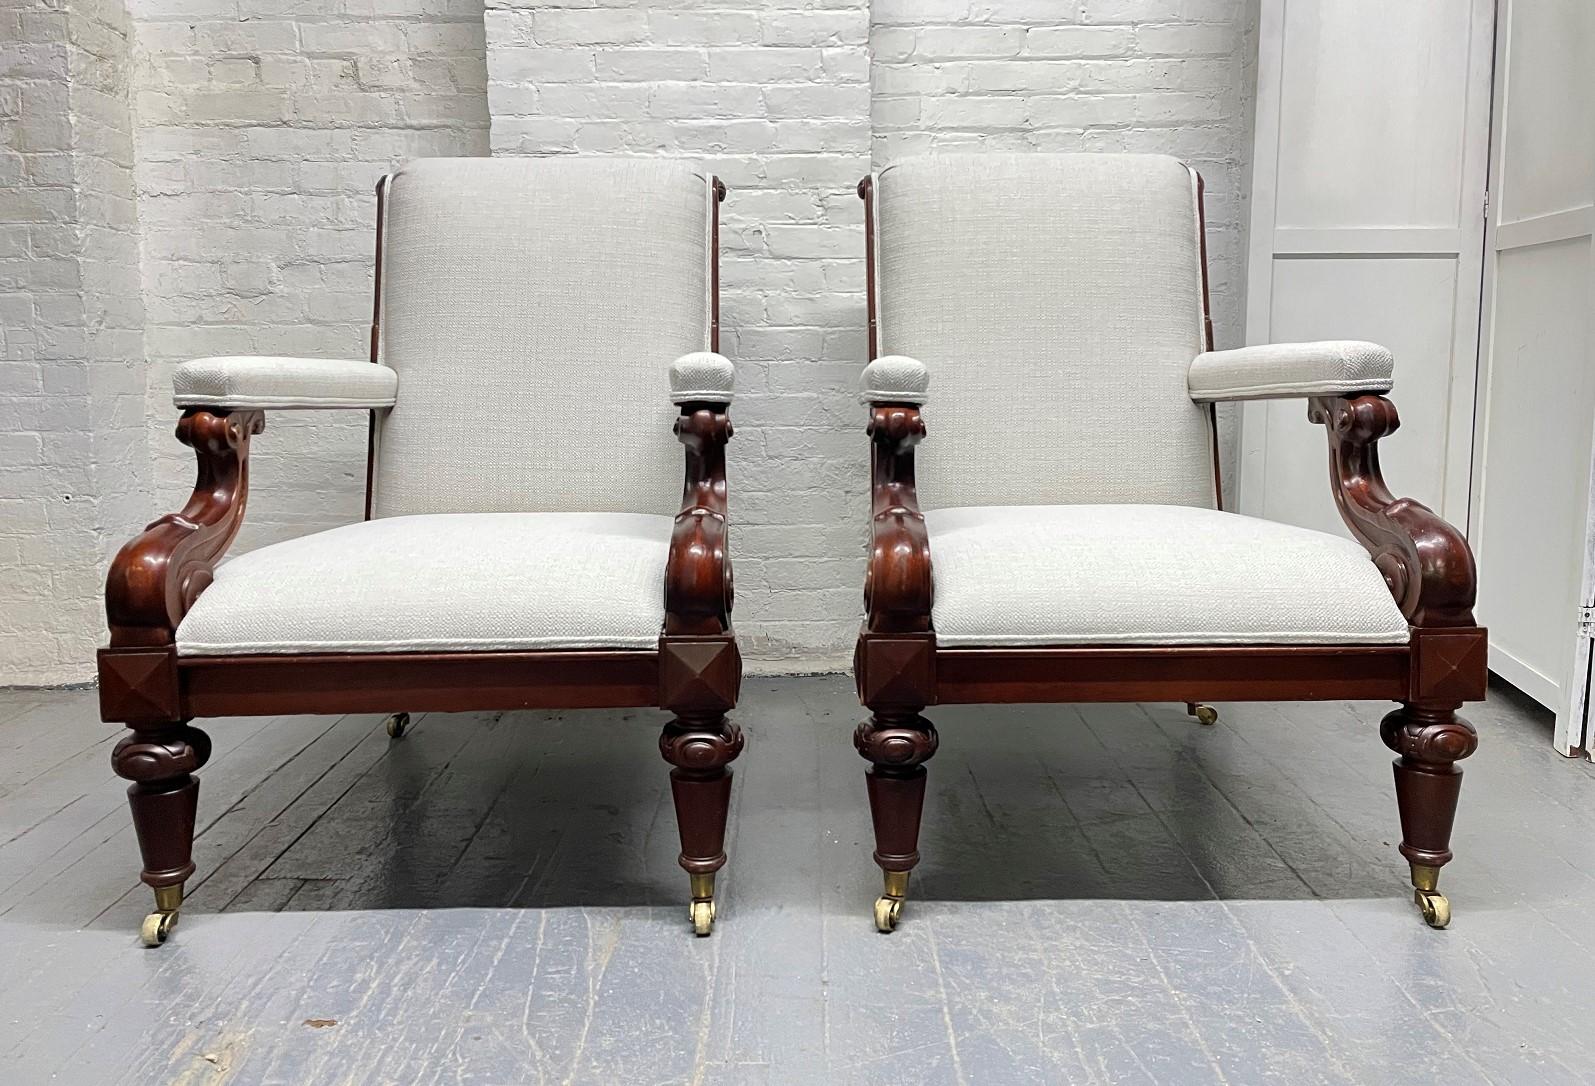 Pair of Ralph Lauren Upholstered Lounge Chairs. The chairs have solid mahogany frames, brass casters and are newly upholstered.